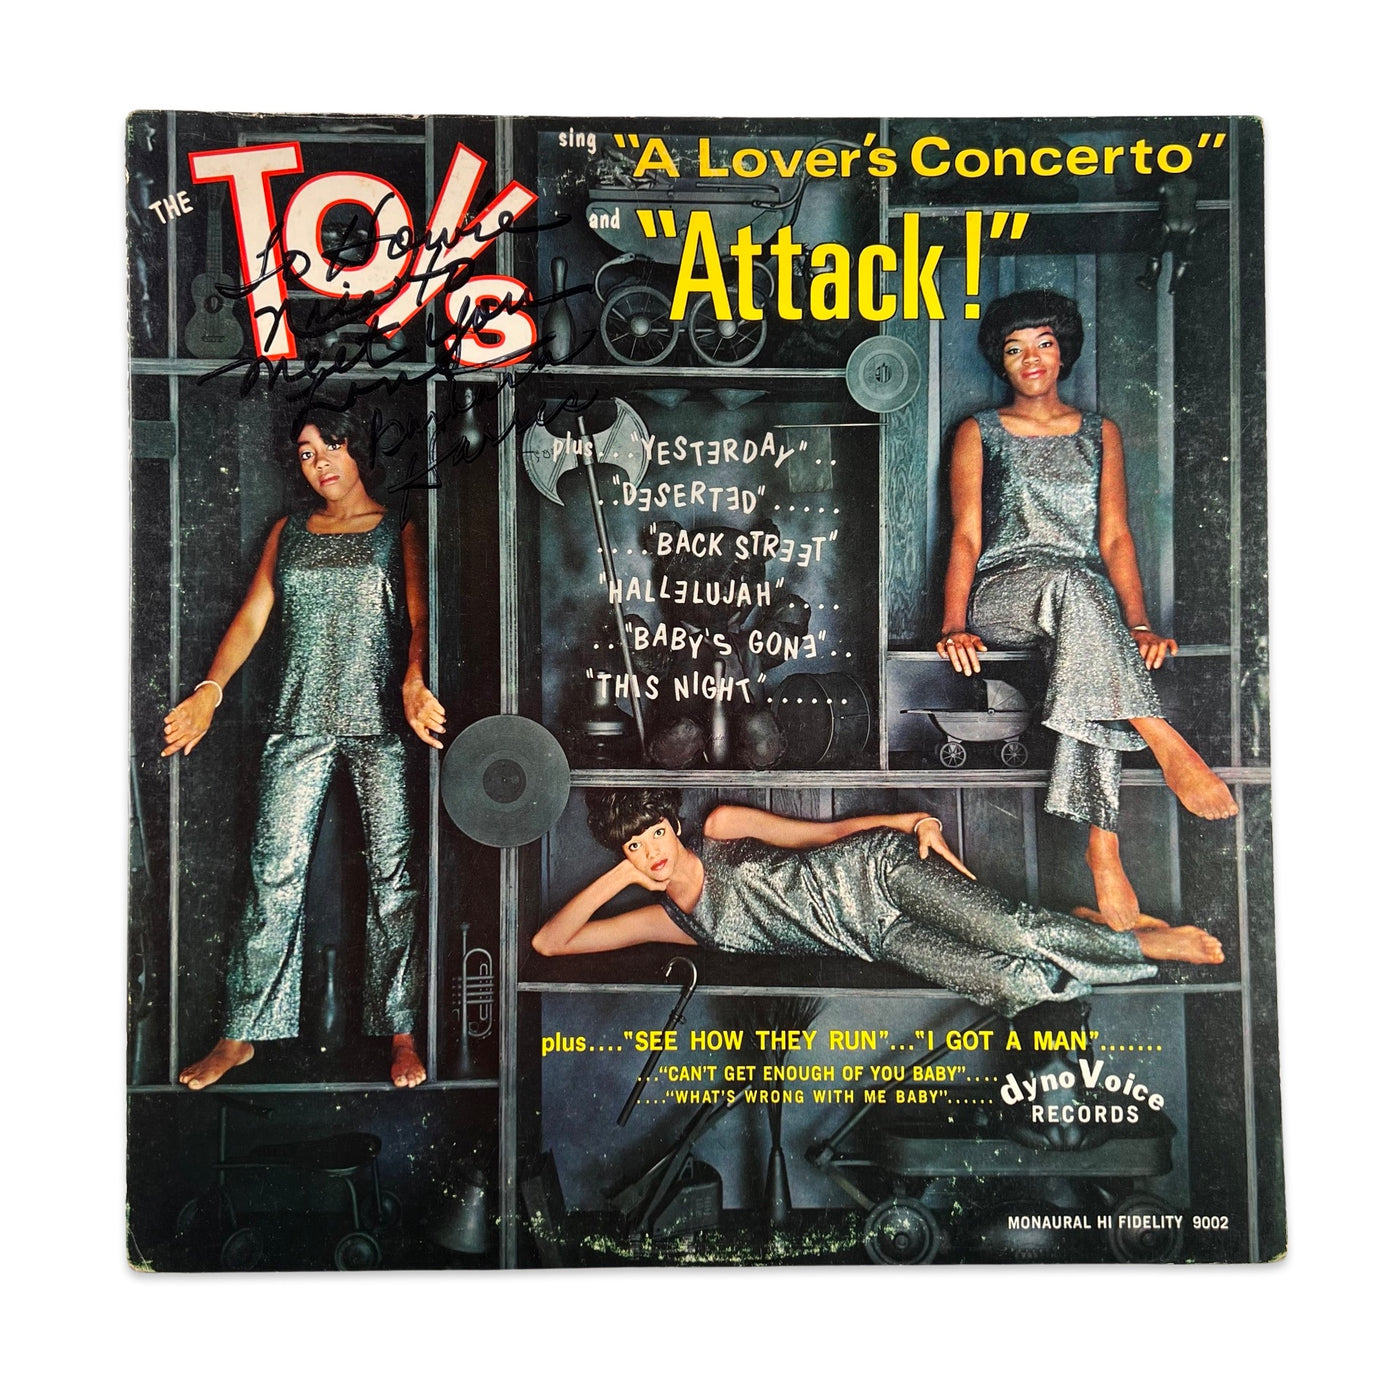 The Toys – The Toys Sing "A Lover's Concerto" And "Attack"